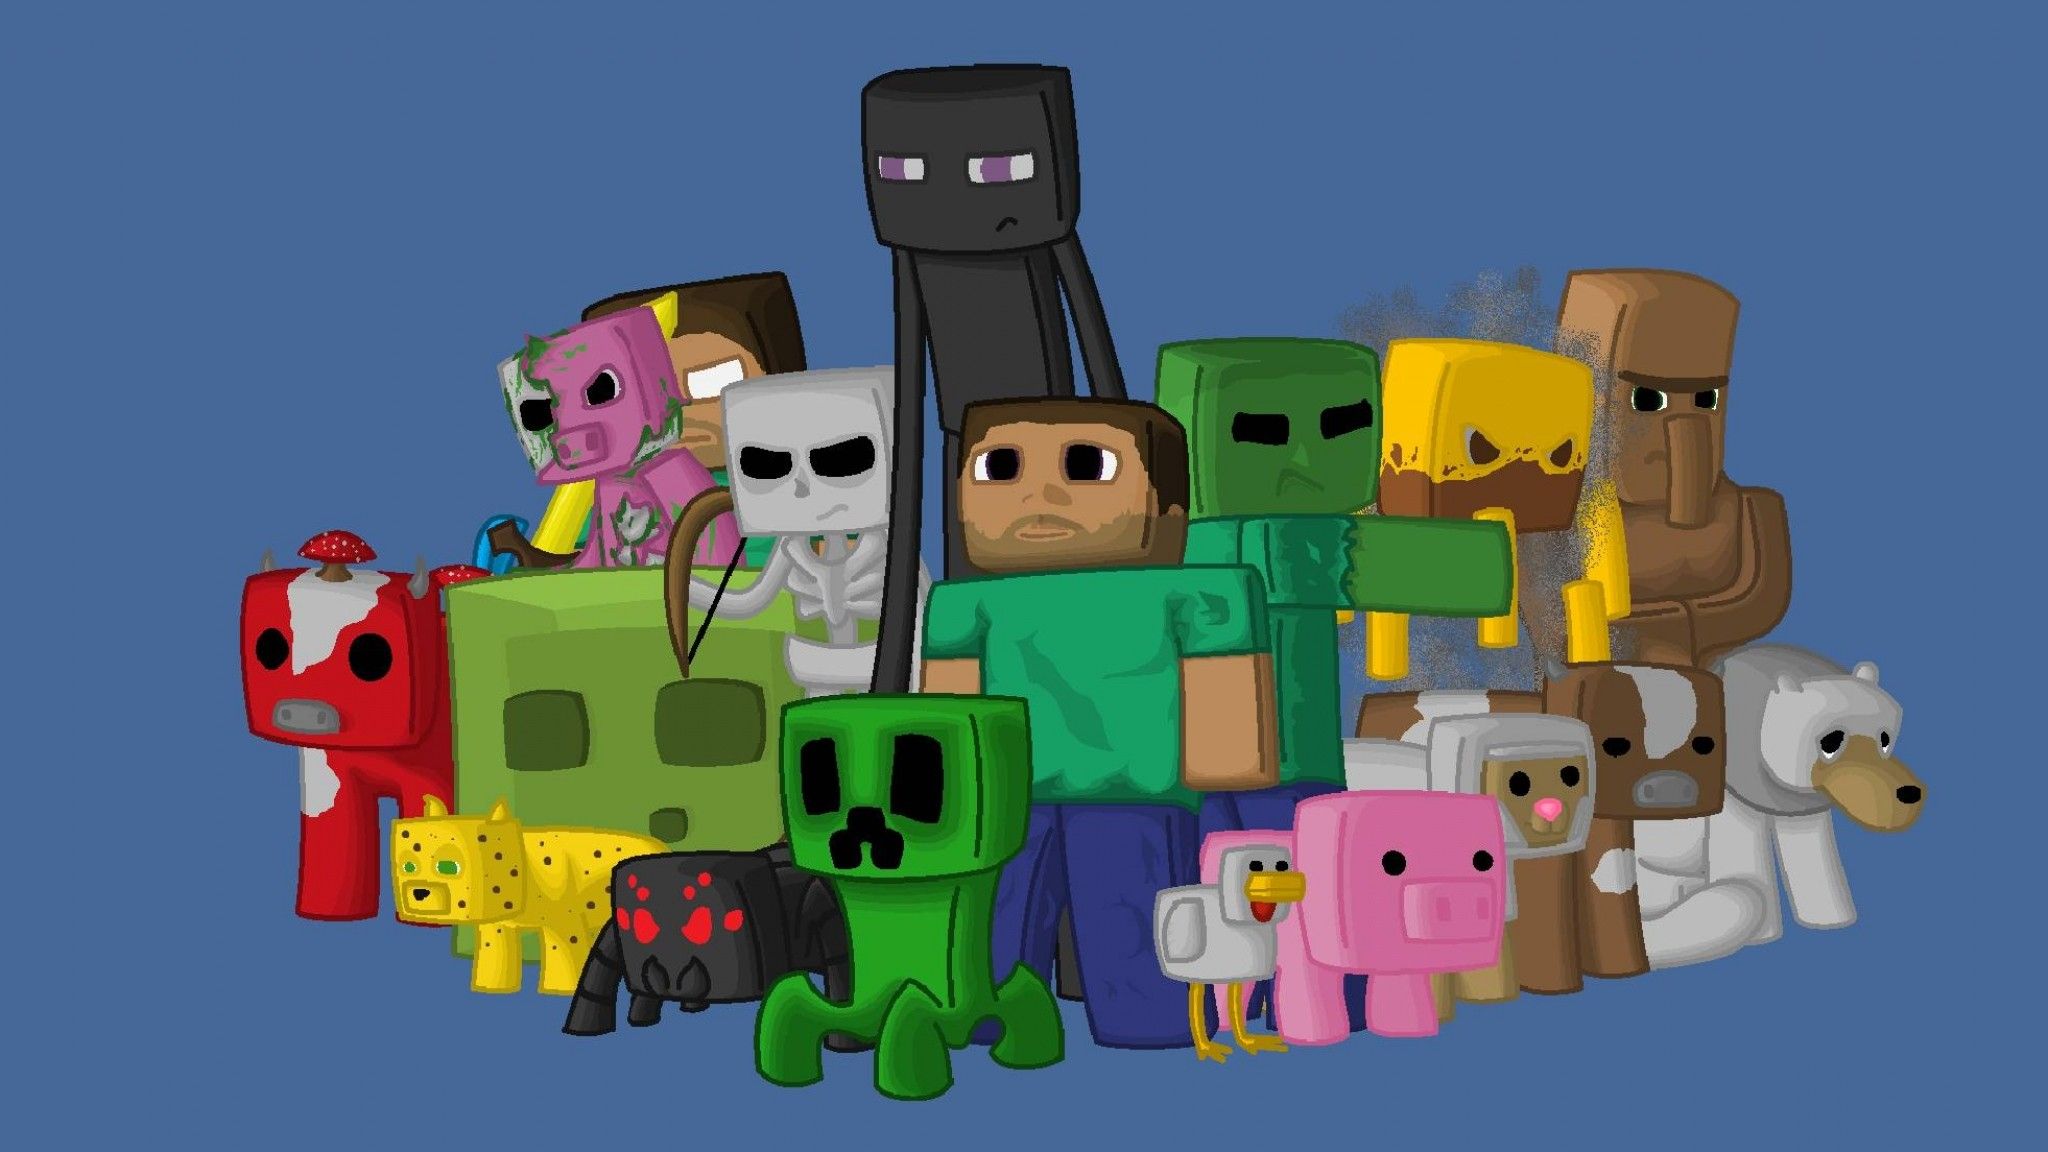 Preview wallpaper minecraft, characters, game, pixels, java 2048x1152. Minecraft wallpaper, Gaming wallpaper, Gaming wallpaper hd